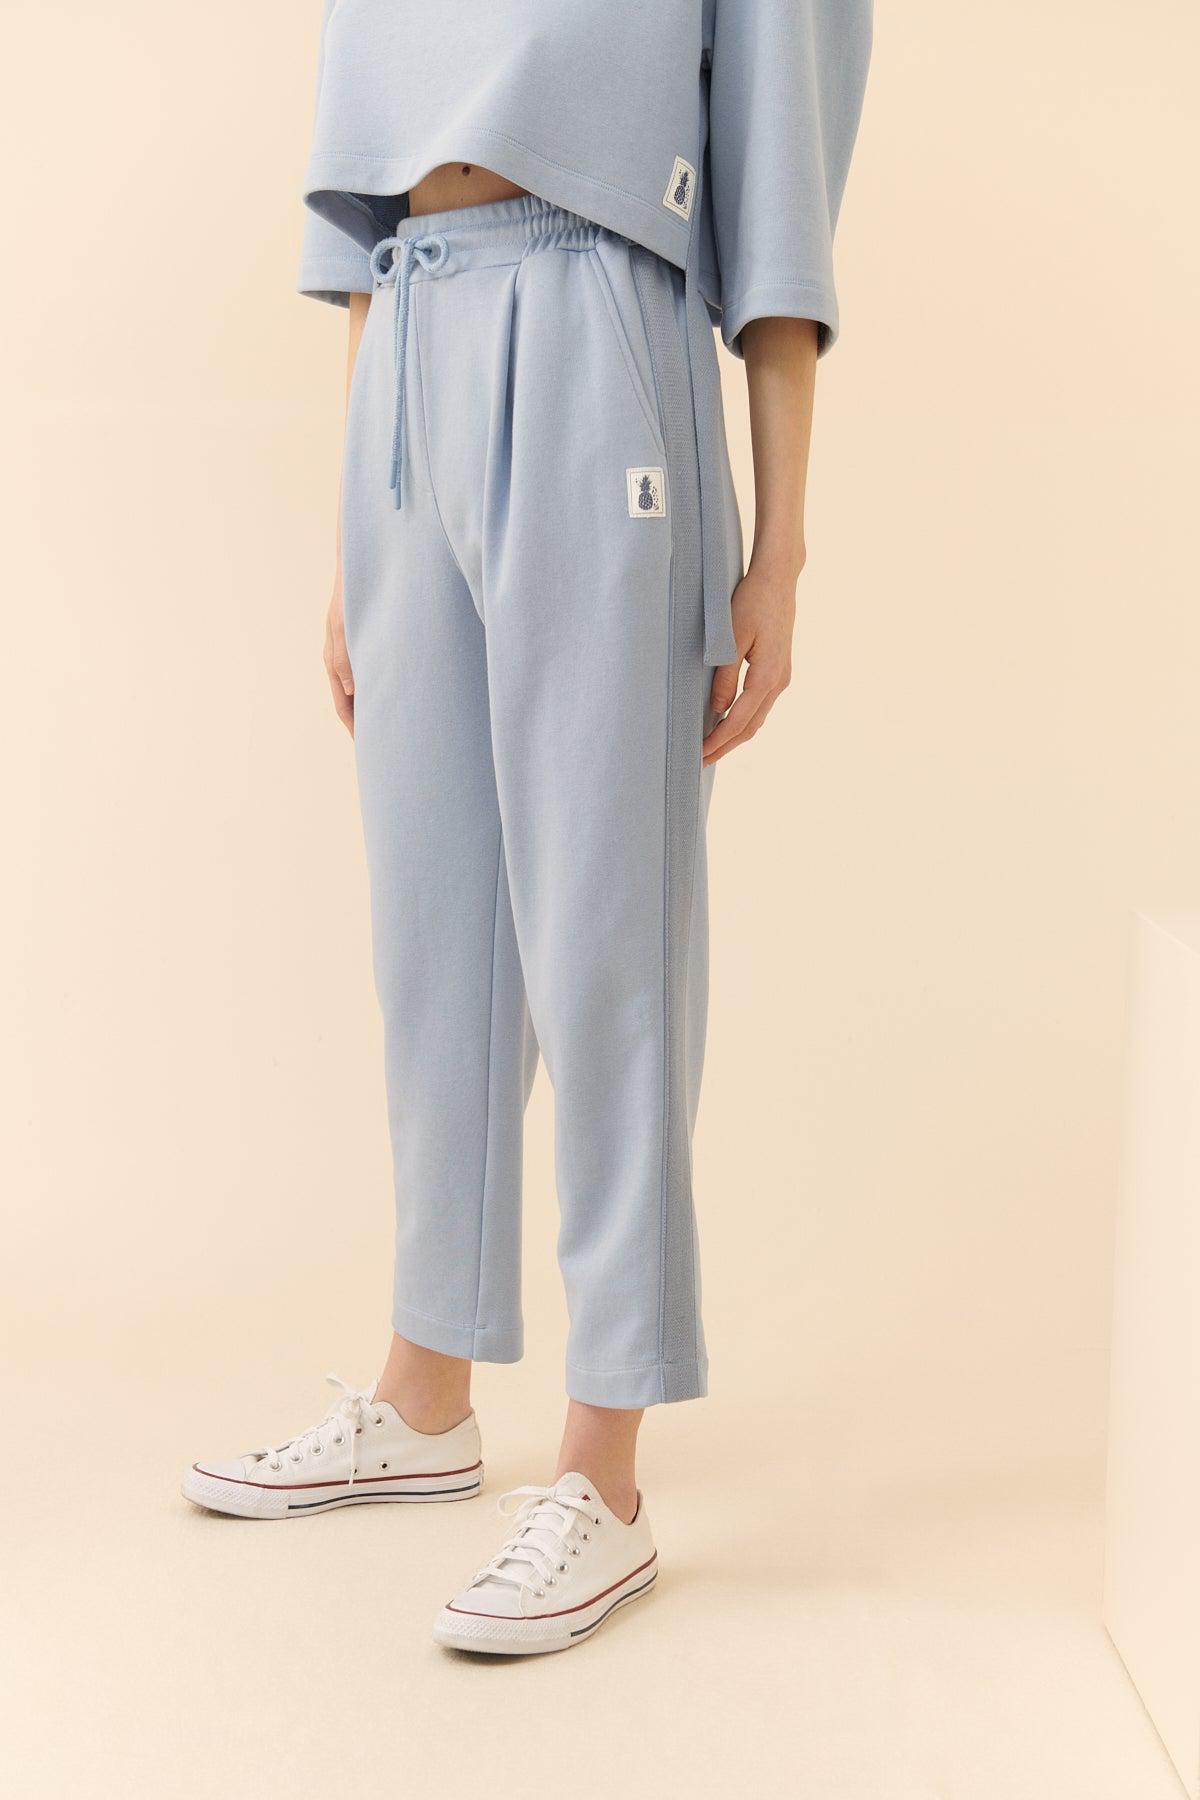 Pastel Blue Casual Trousers --[BLUE]